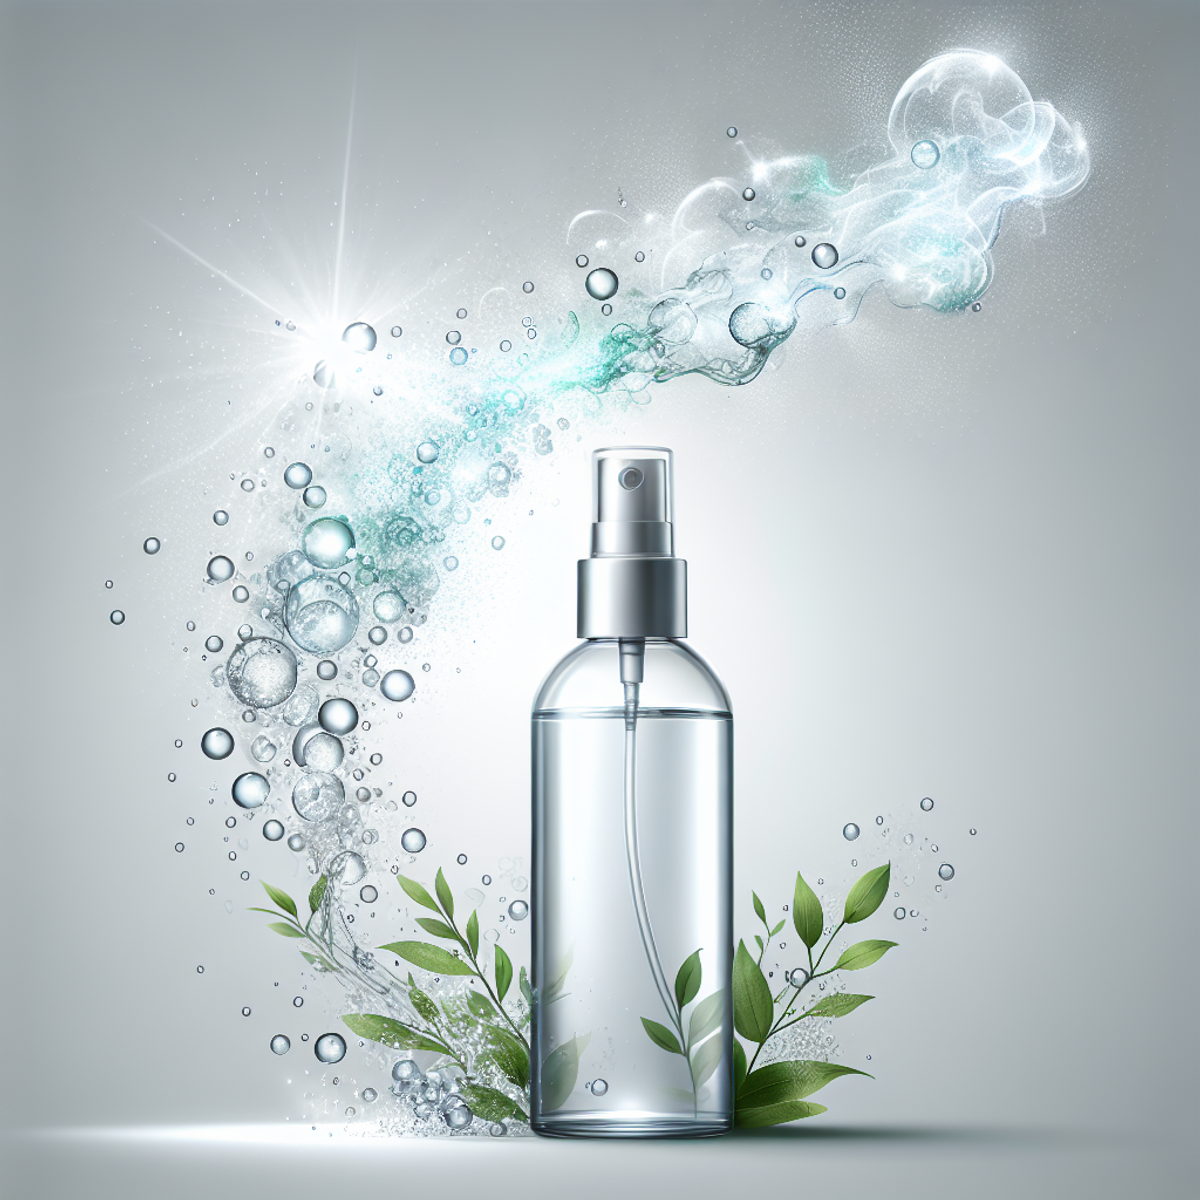 A transparent glass spray bottle emitting a burst of cleanliness and natural elements, represented by a mist of transparent water droplets and a dash